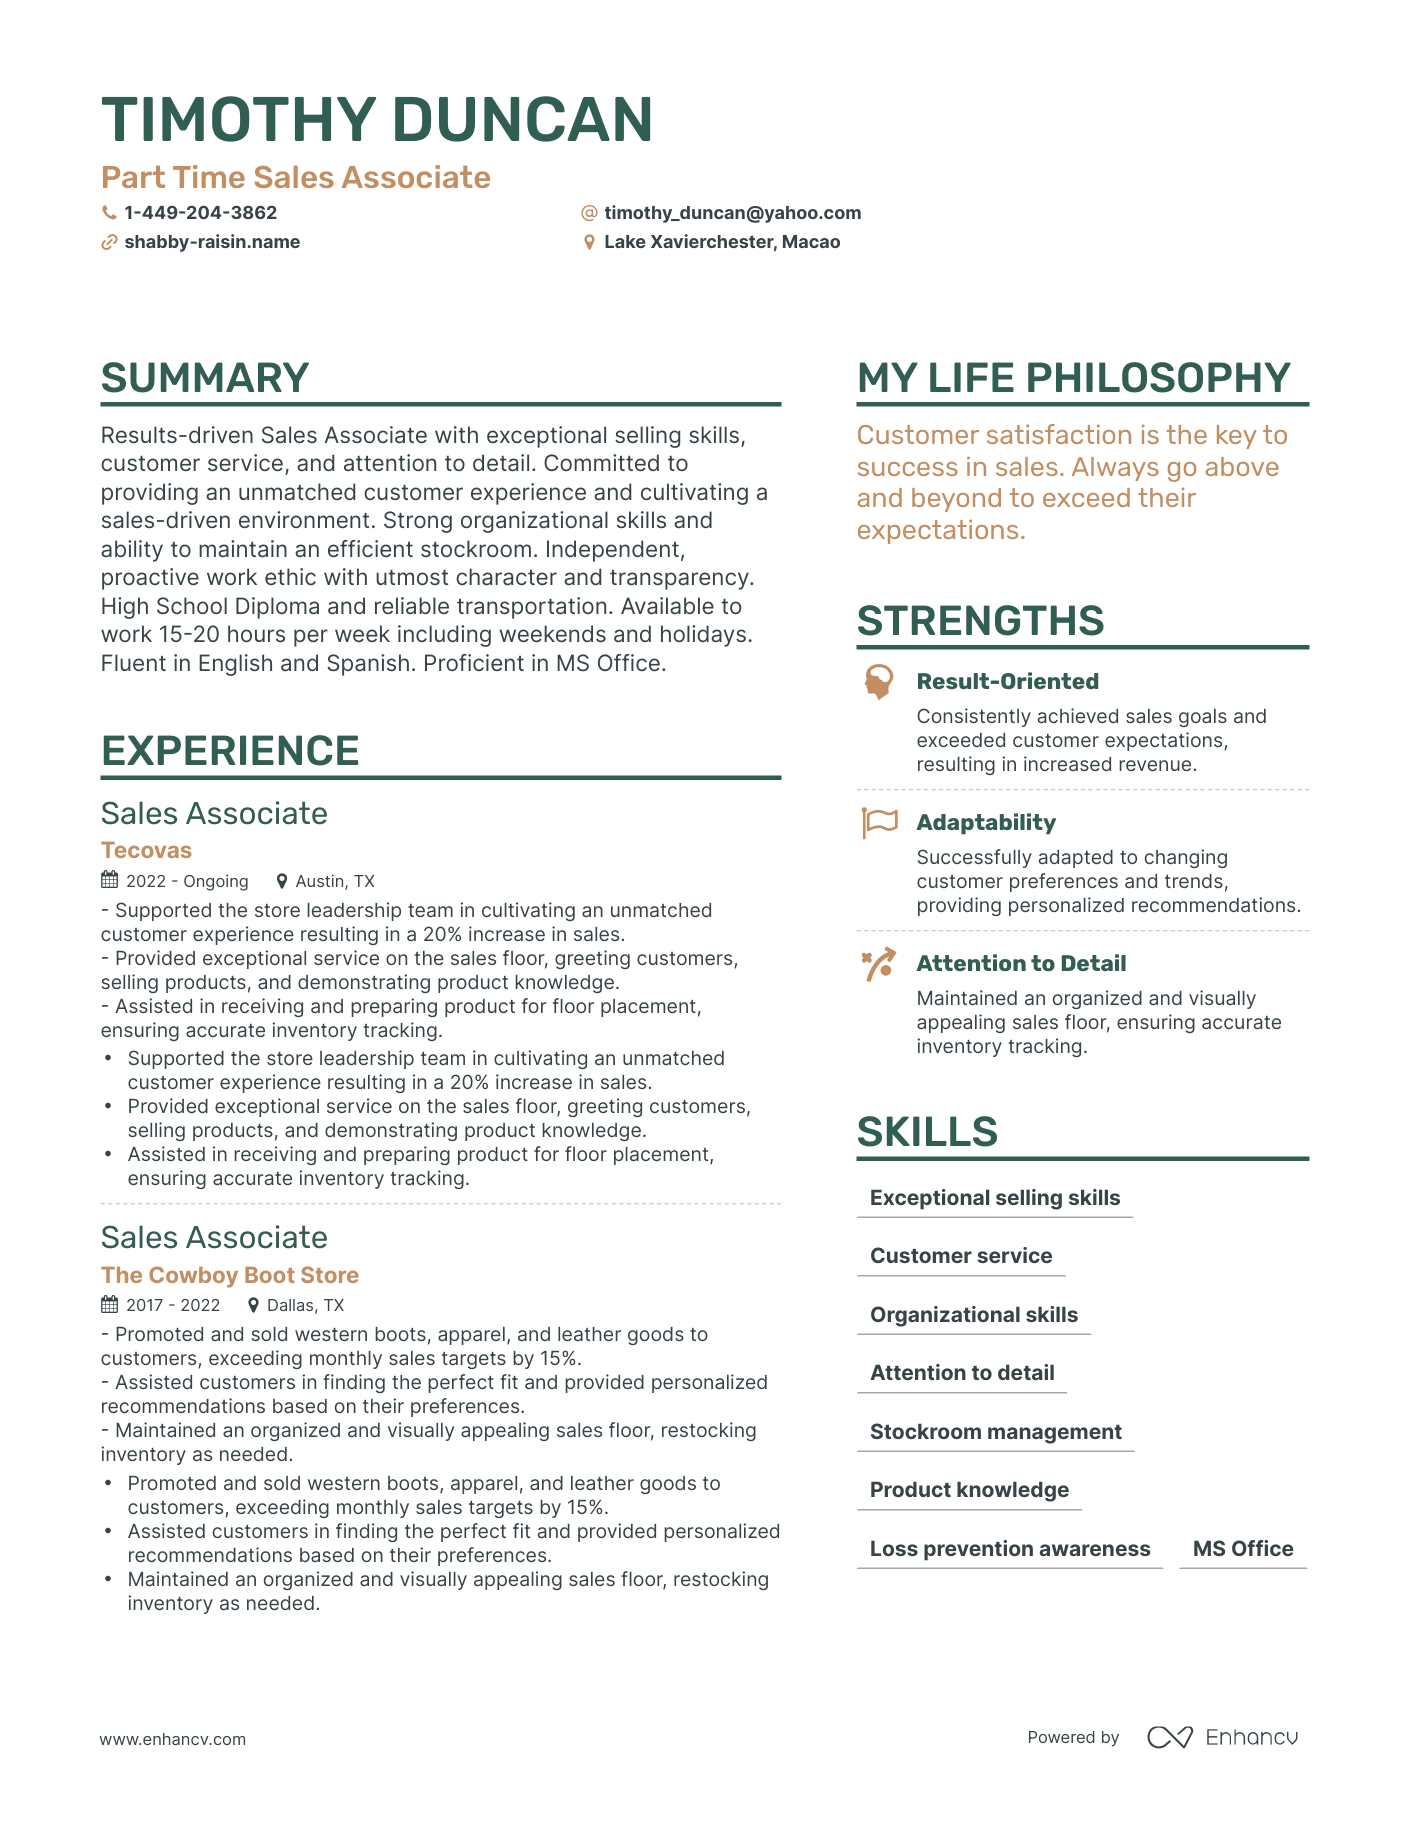 Part Time Sales Associate resume example